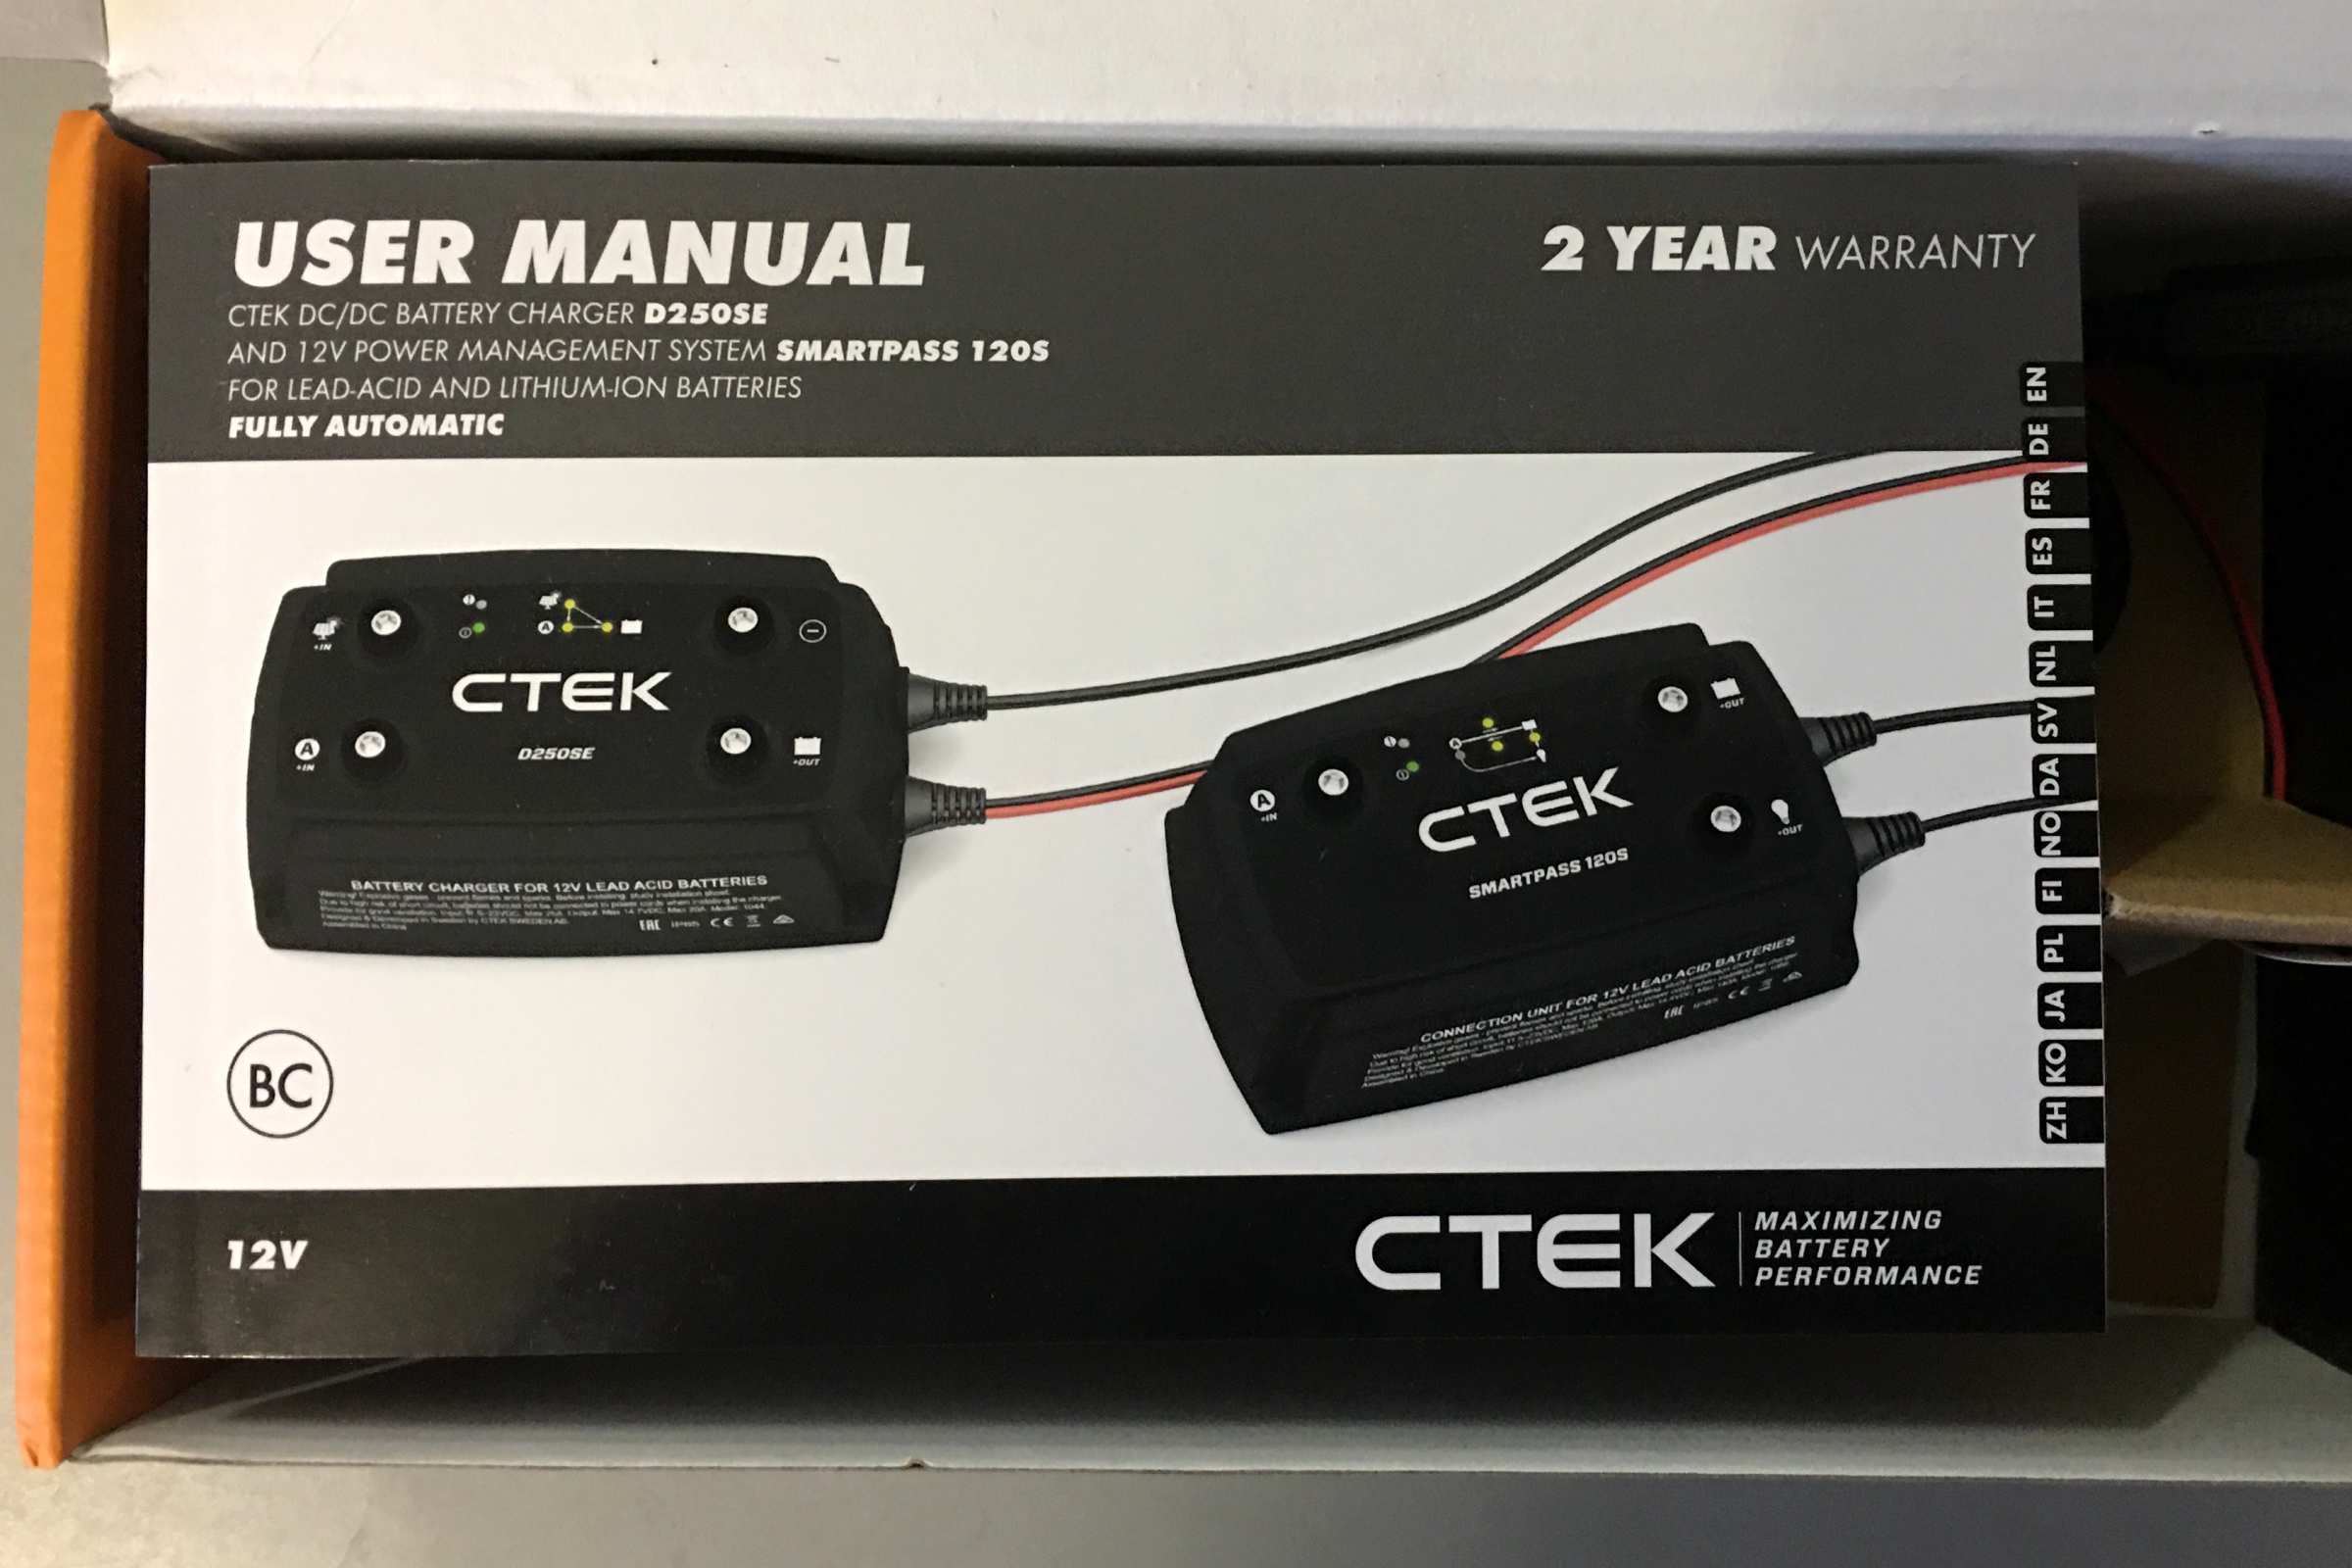 CTEK D250SE 20A On Board Battery Charger Review